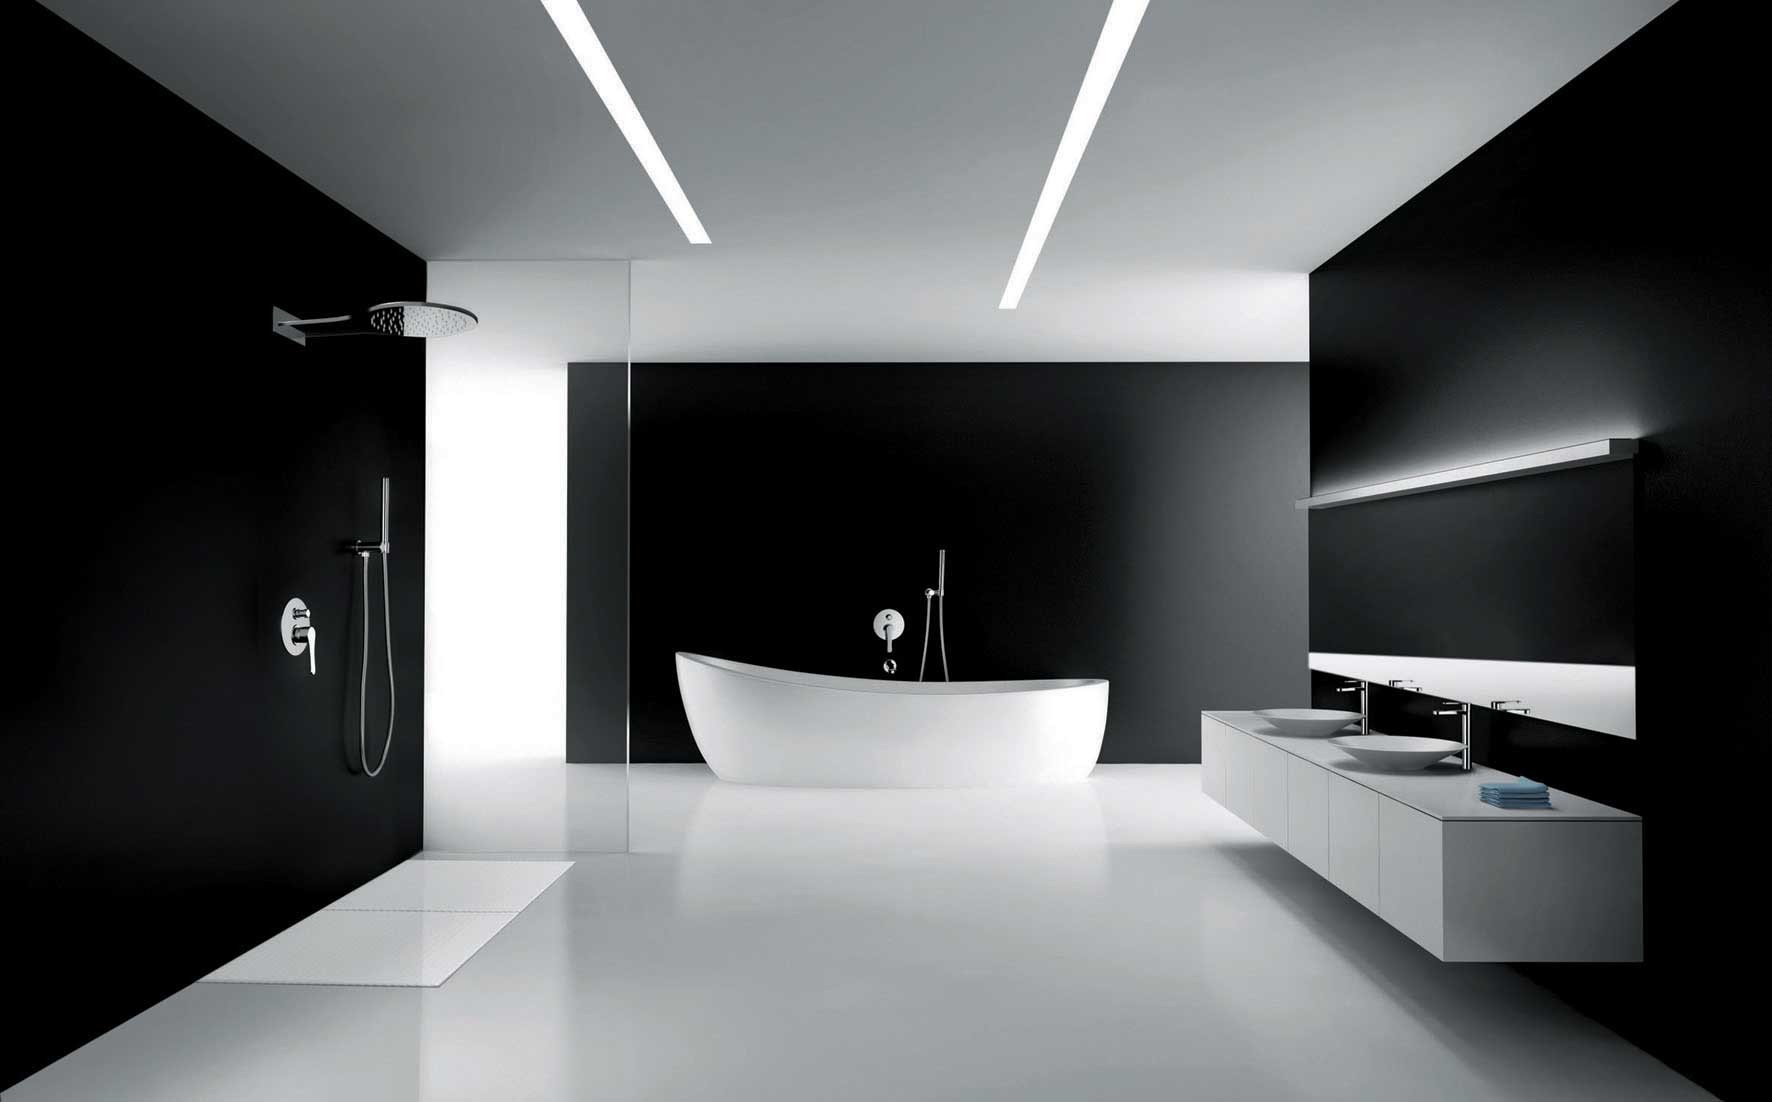 Black-white-bathroom-design-with-simple-atmosphere-over-the-room